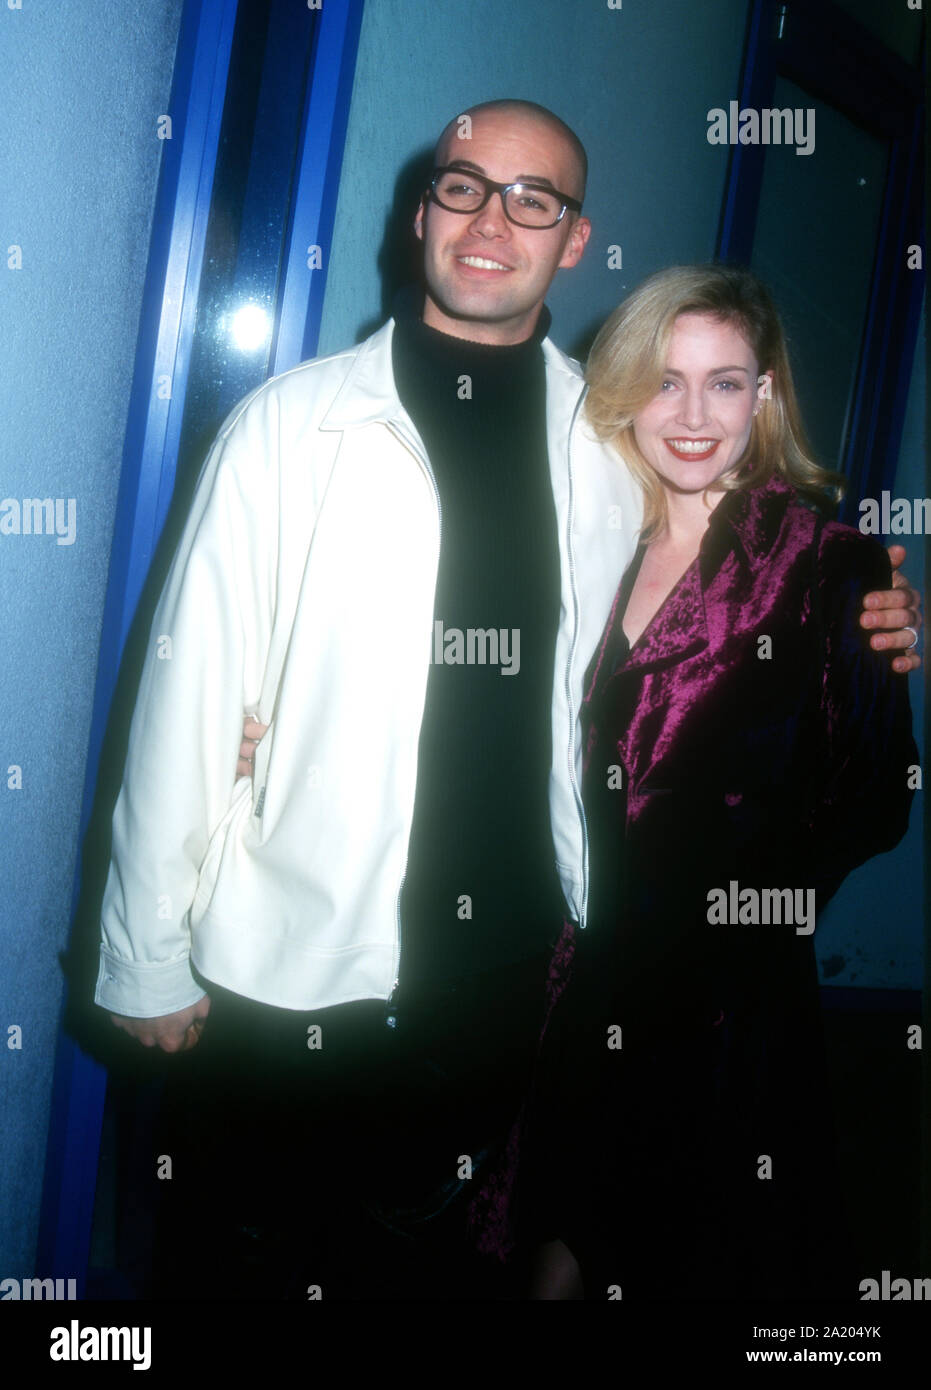 Hollywood, California, USA 11th January 1995 Actor Billy Zane and wife actress Lisa Collins attend 'Tales from the Crypt: Demon Knight' Hollywood Premiere on January 11, 1995 at Hollywood Galaxy Theatre in Hollywood, California, USA. Photo by Barry King/Alamy Stock Photo Stock Photo